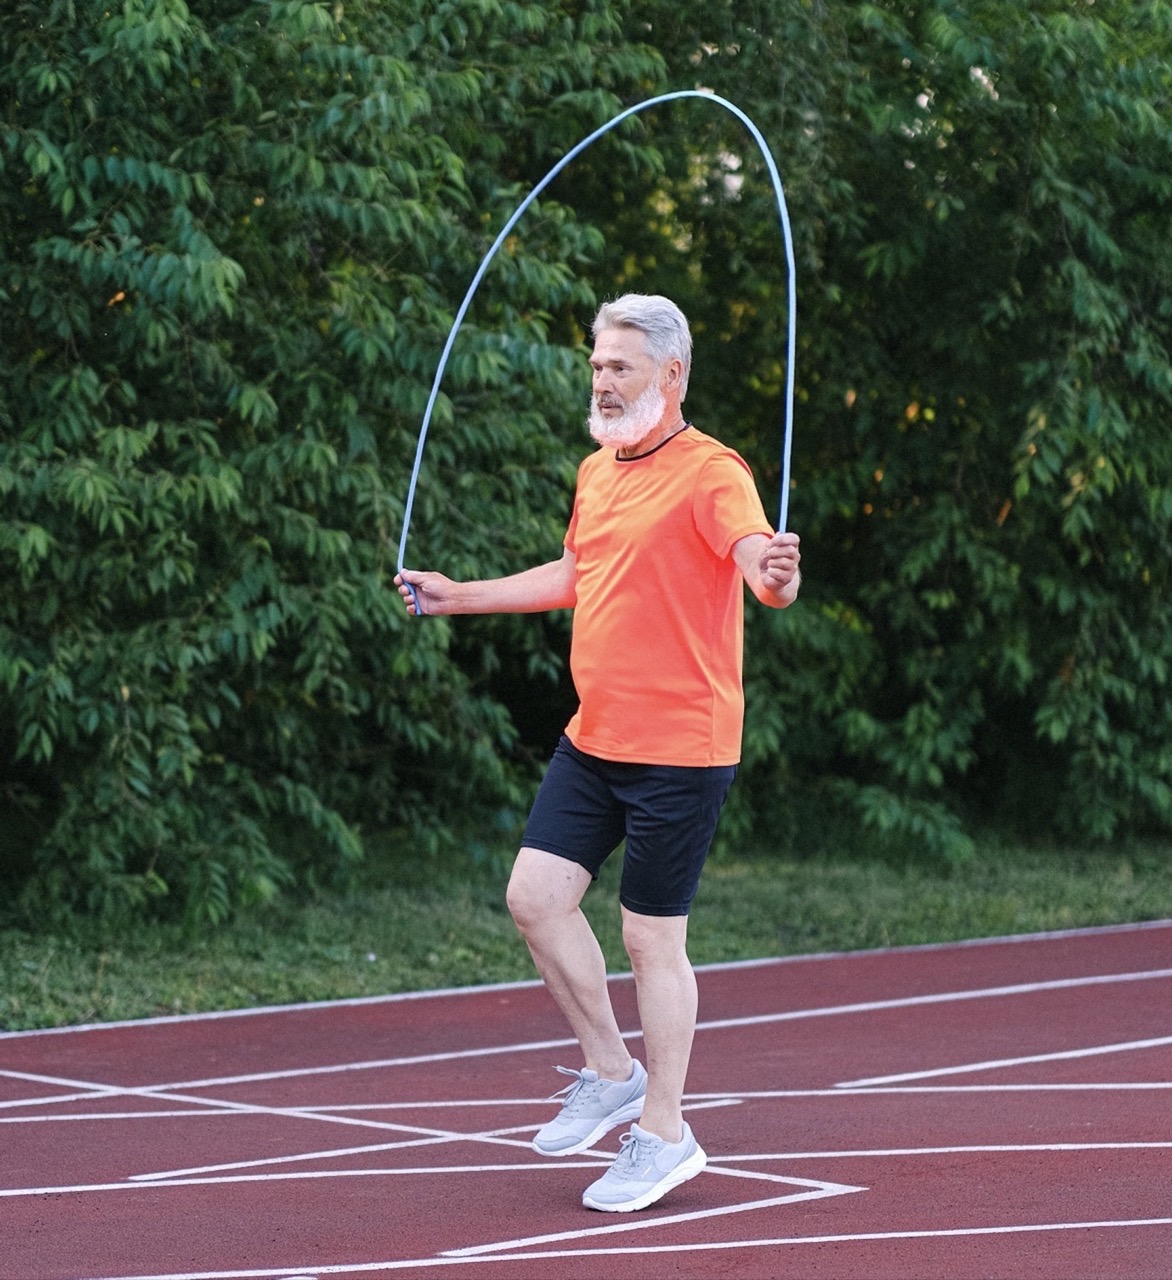 Lap band surgery patient using a jump rope